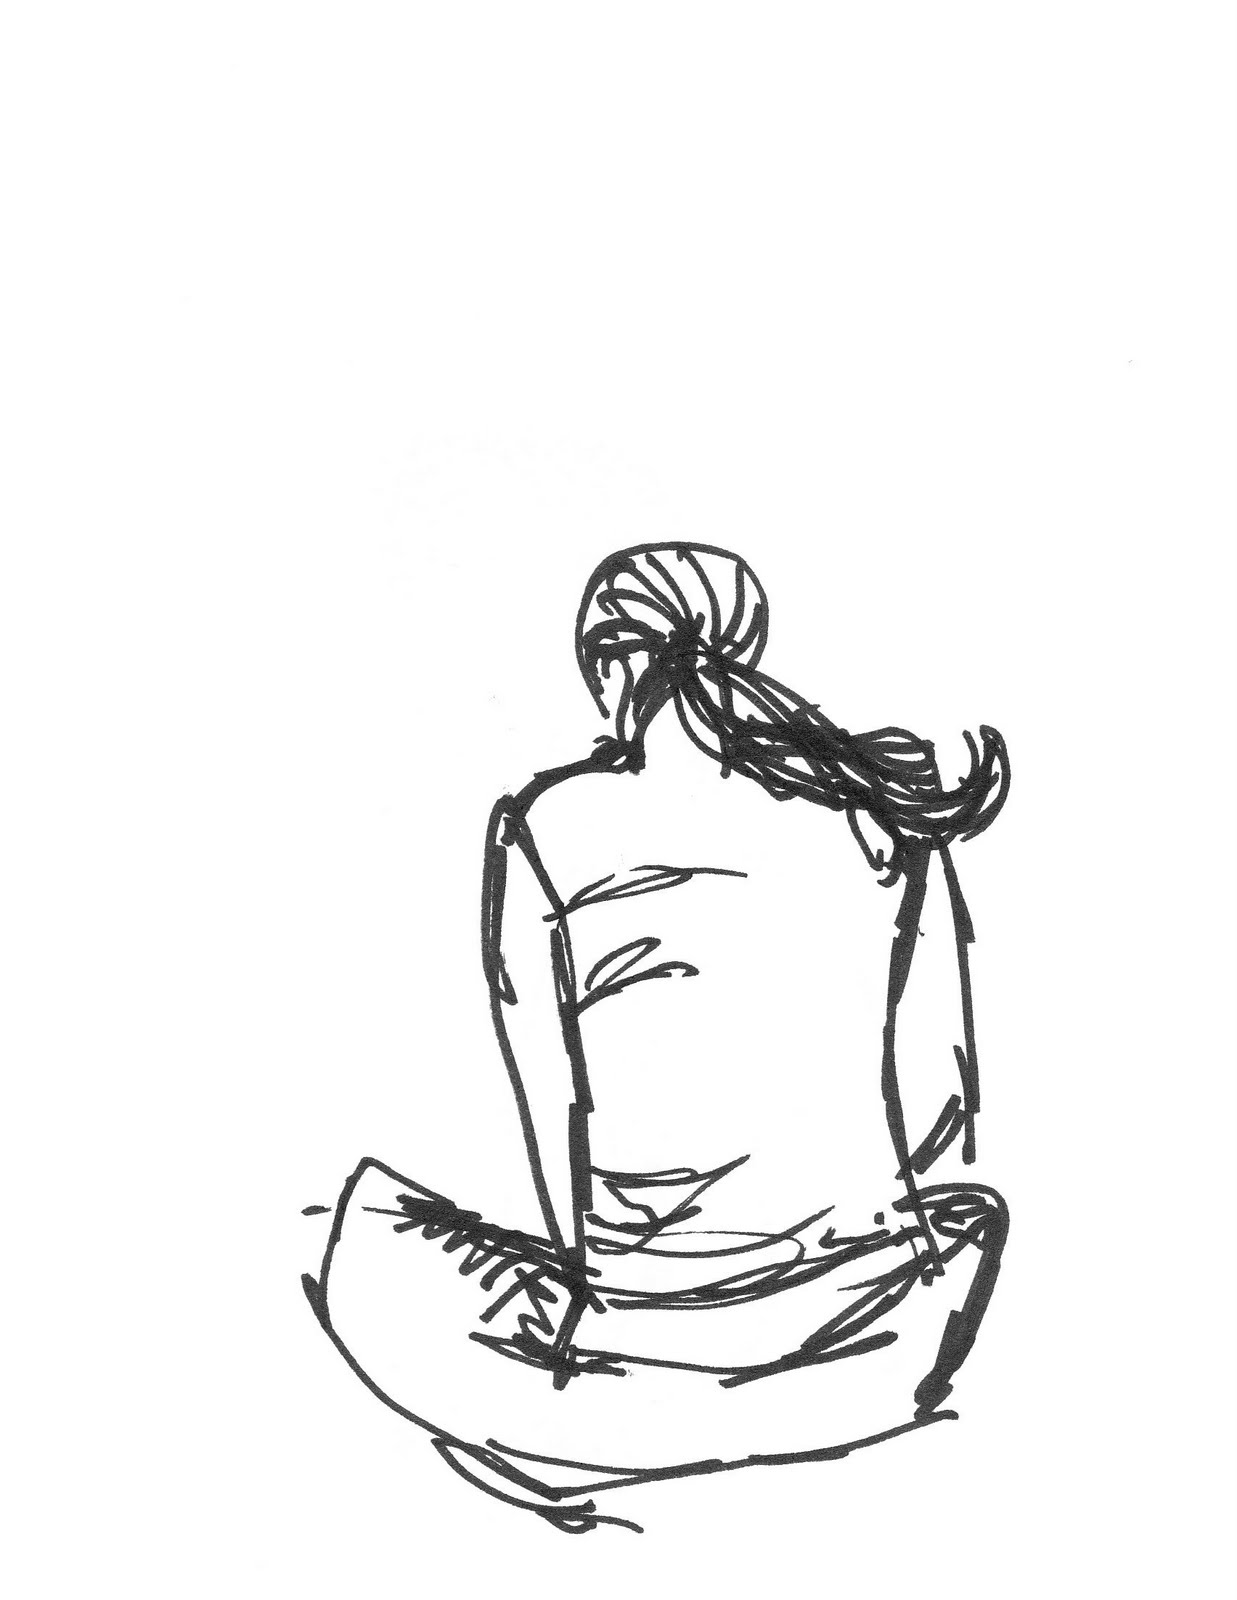 Sitting Criss Cross Drawing Reference : How To Draw A Person Sitting